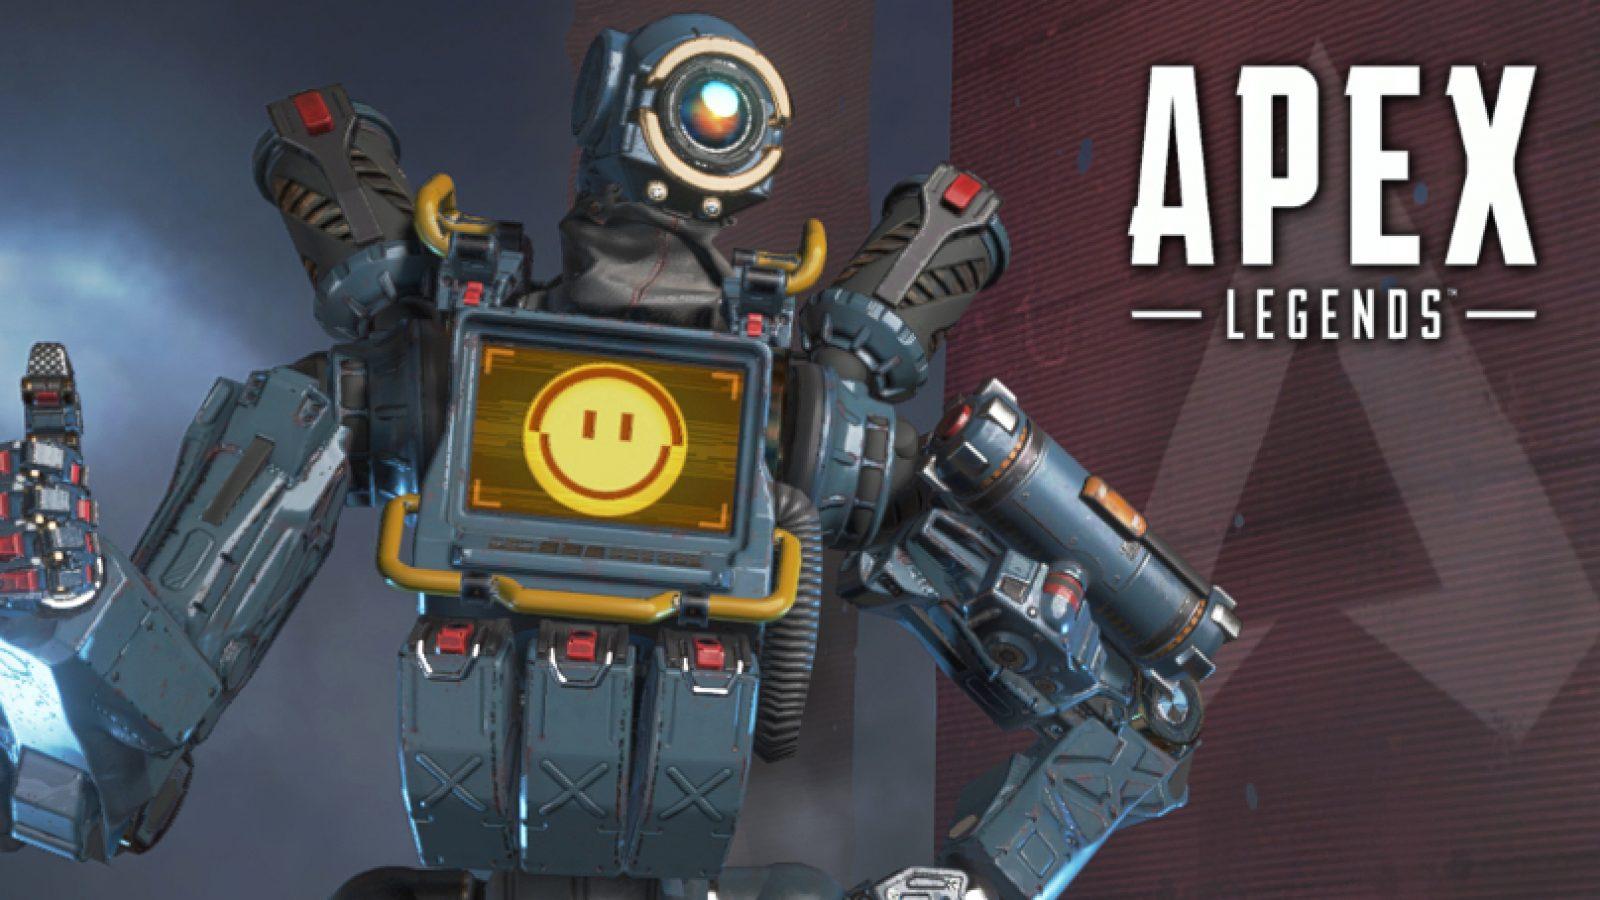 Apex Legends Awesome Wallpapers - Top Free Apex Legends Awesome ...